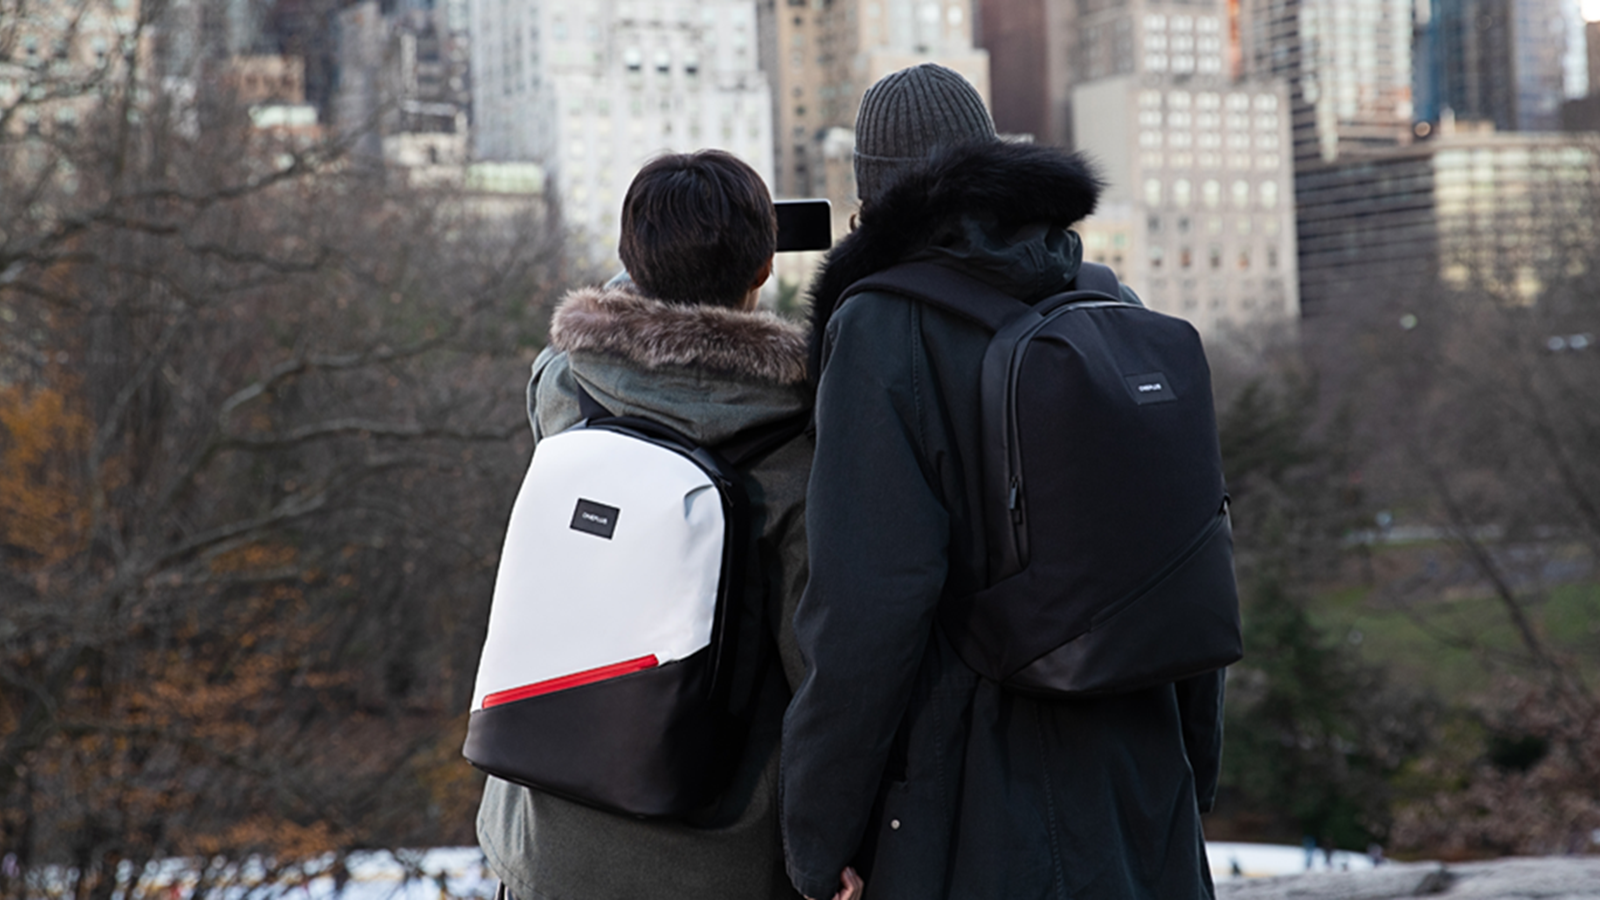 The Latest OnePlus Backpack Is Graceful, Stylish, and Ready for Commute